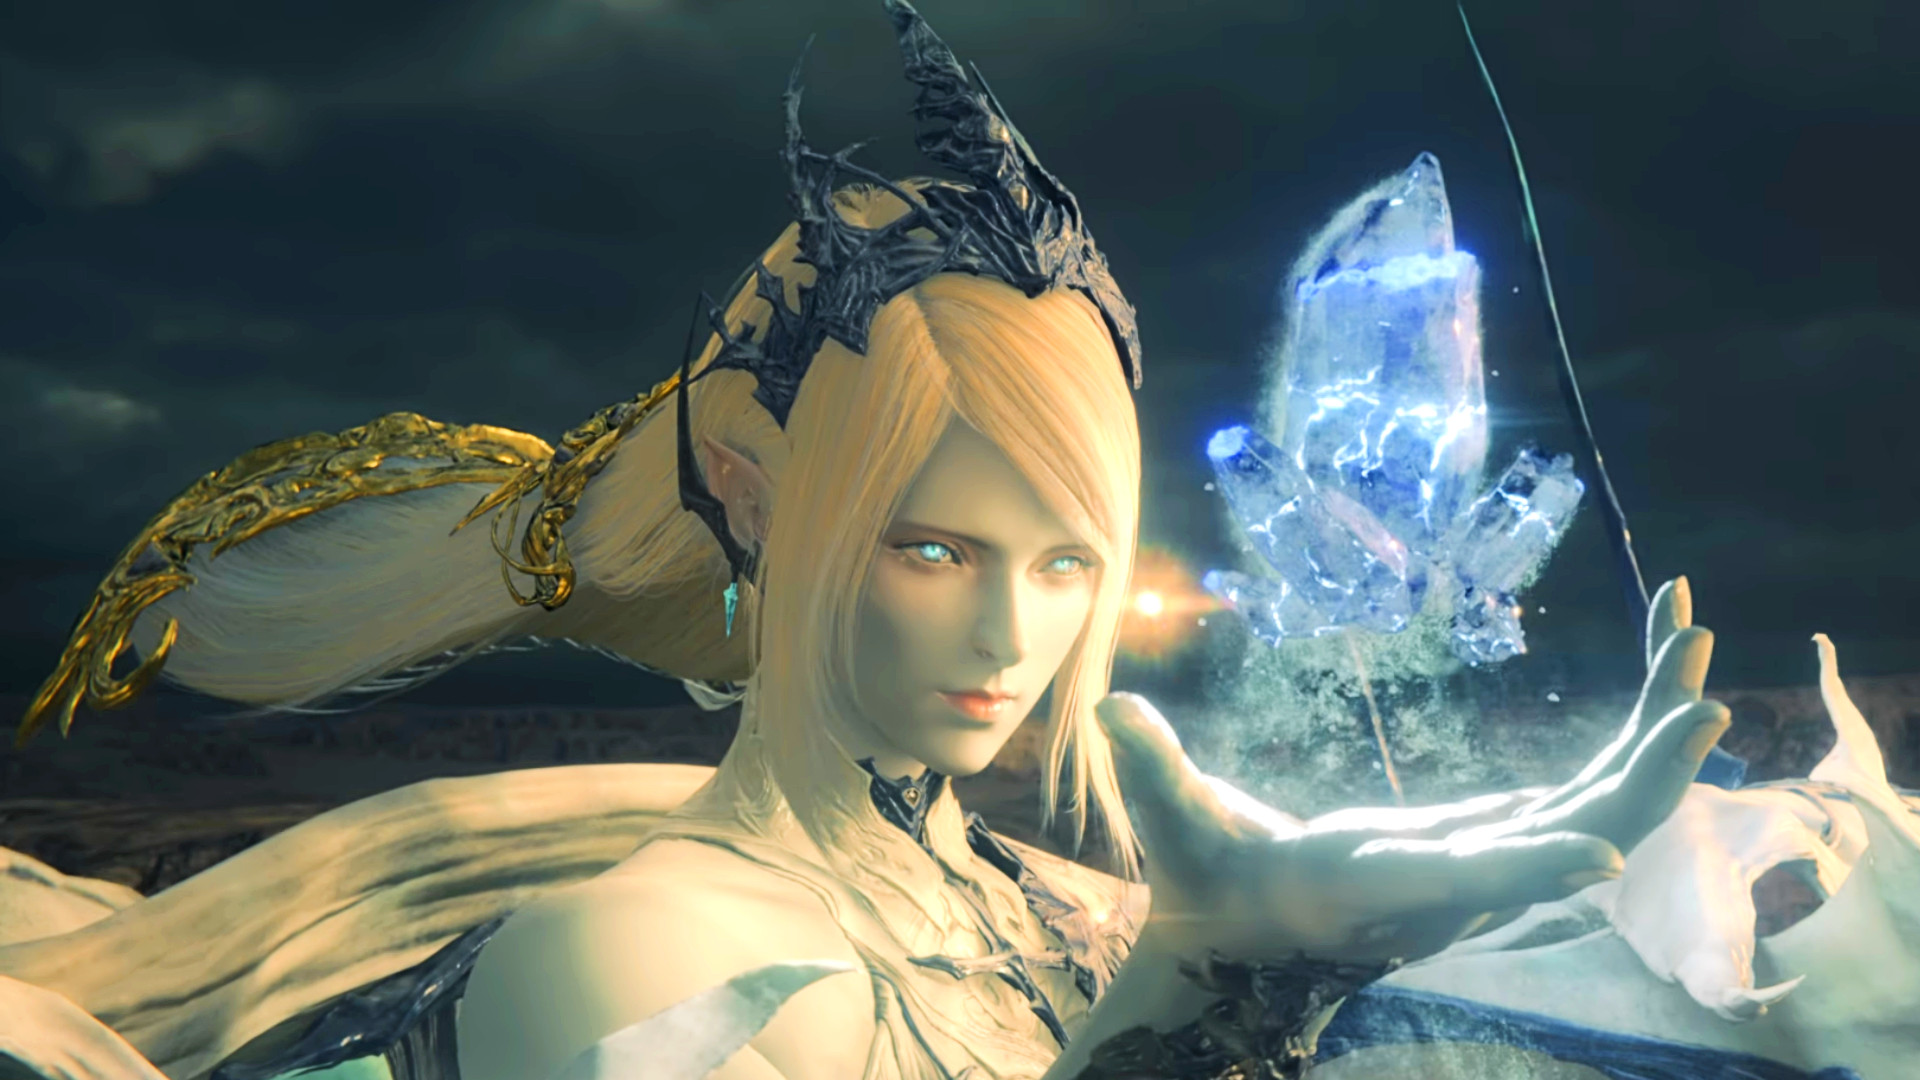 FF16 trailer could show off the next Final Fantasy game in October